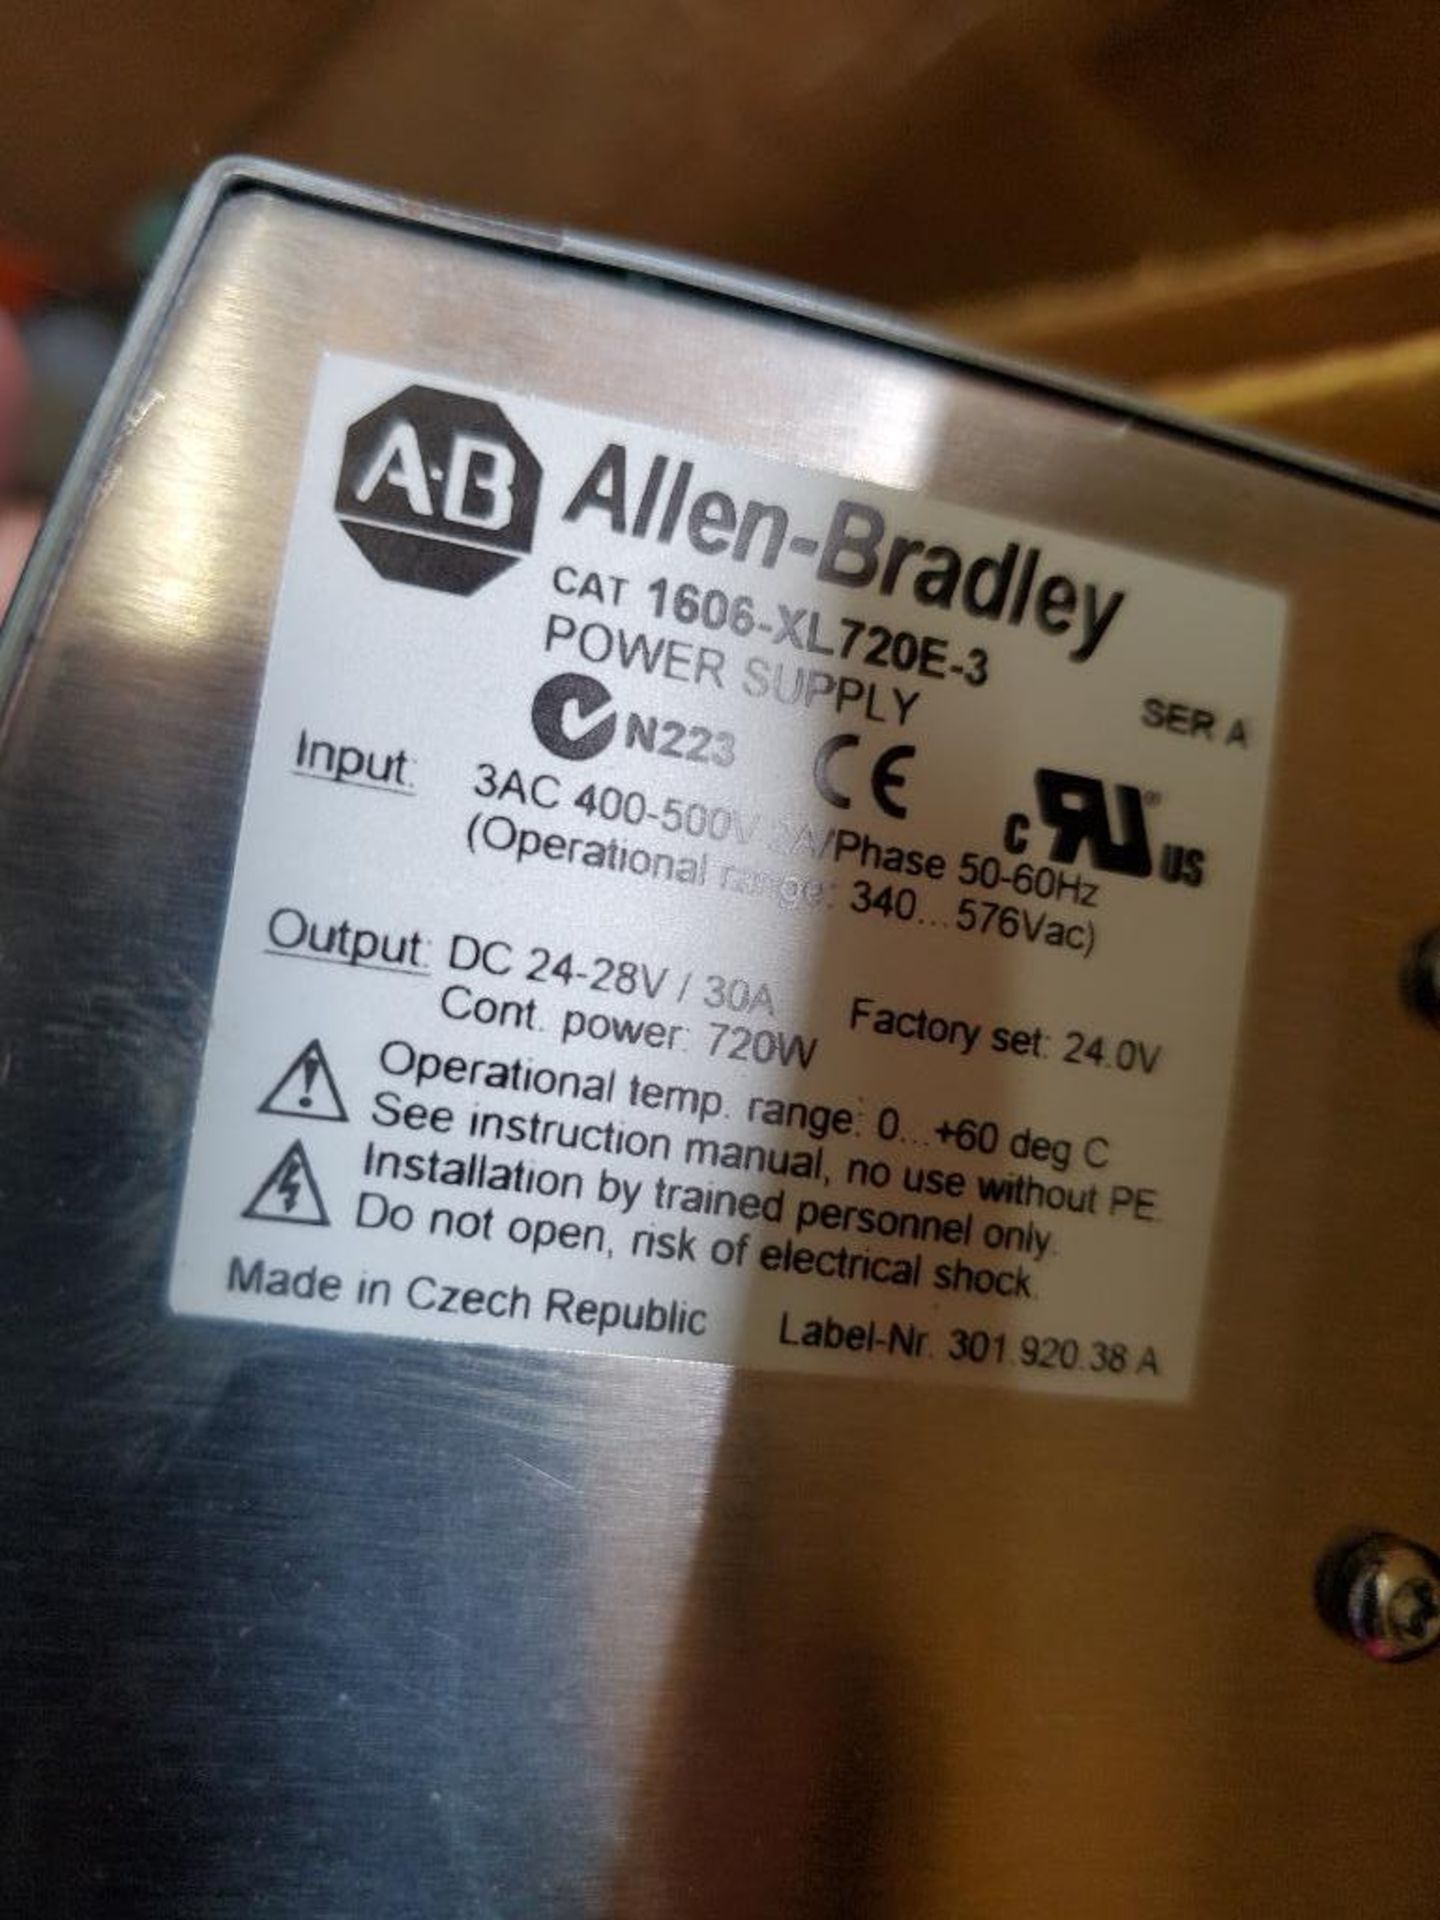 Allen Bradley power supply. Catalog number 1606-XL720E-3. New in box. - Image 3 of 5